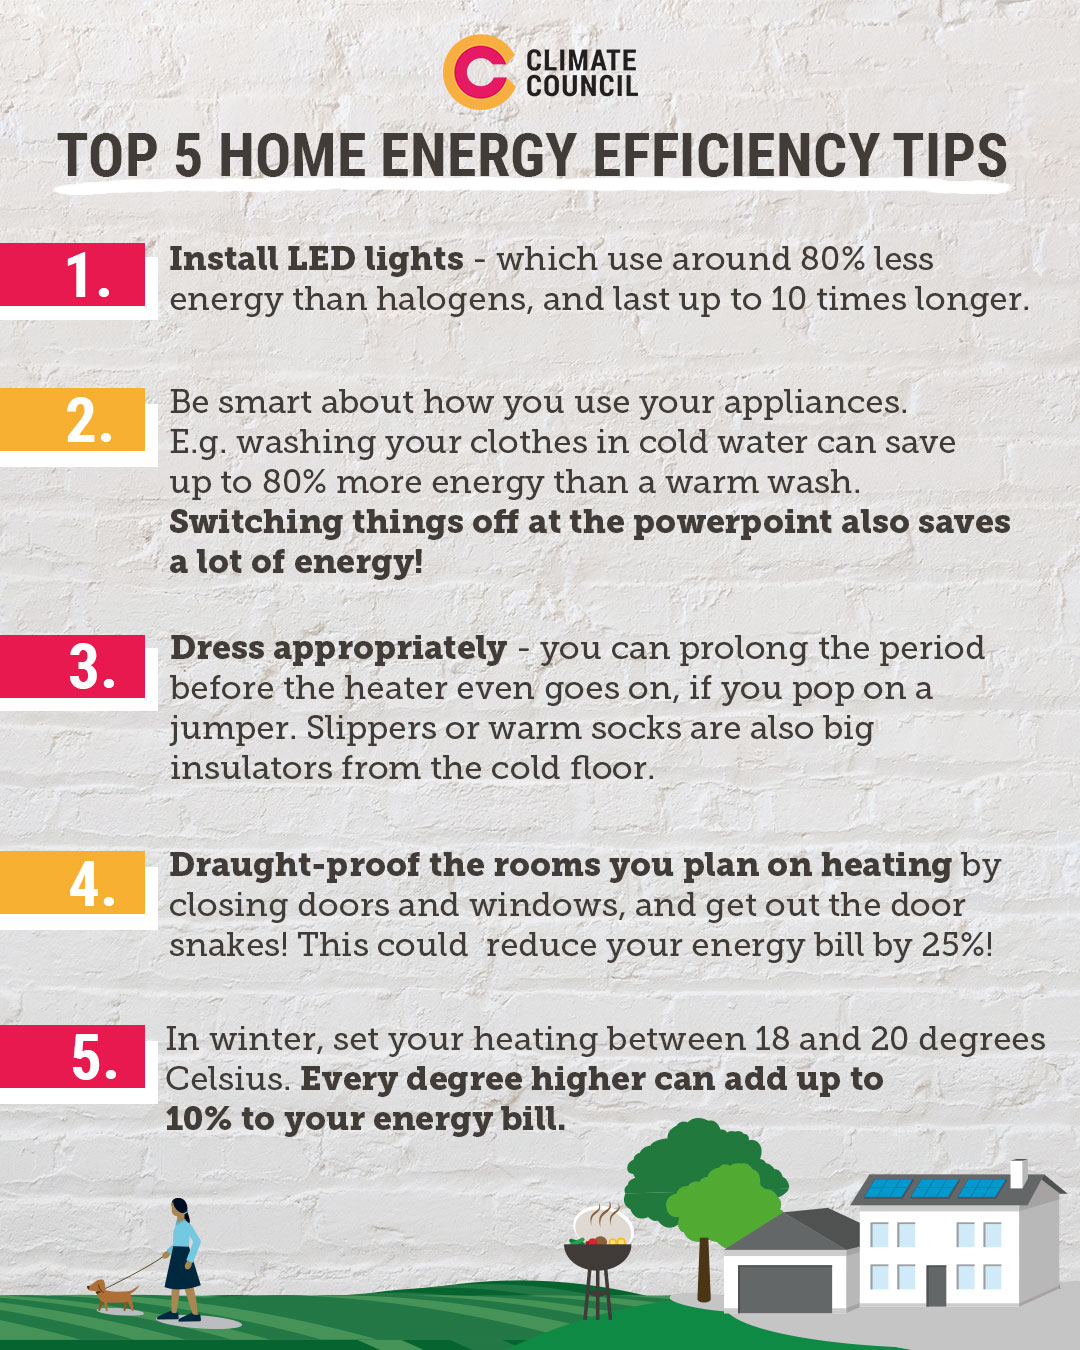 An image containing our top 5 tips for household energy efficiency.